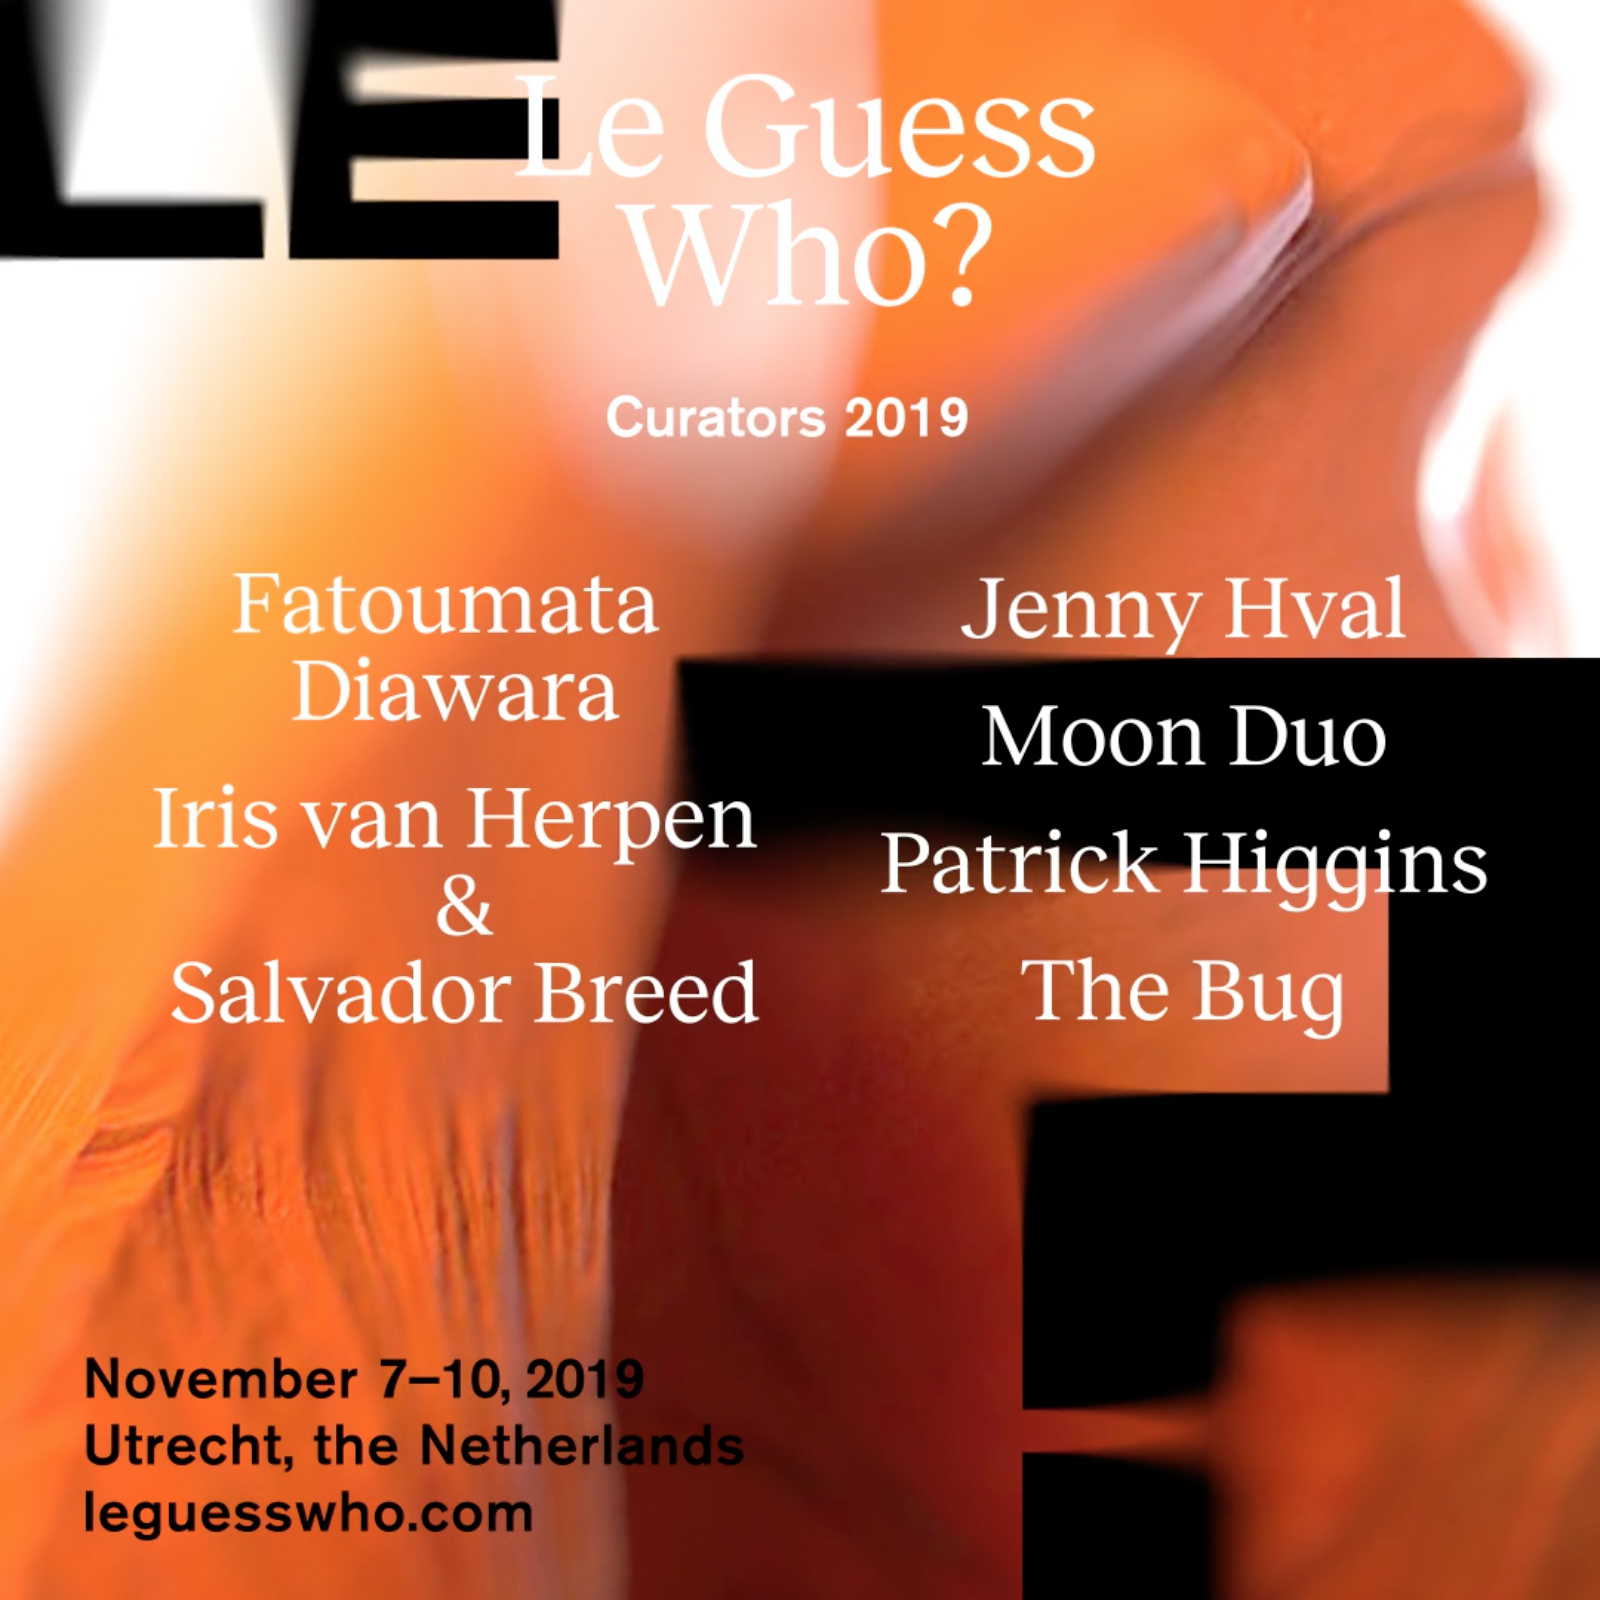 Revealing the guest curators for Le Guess Who? 2019